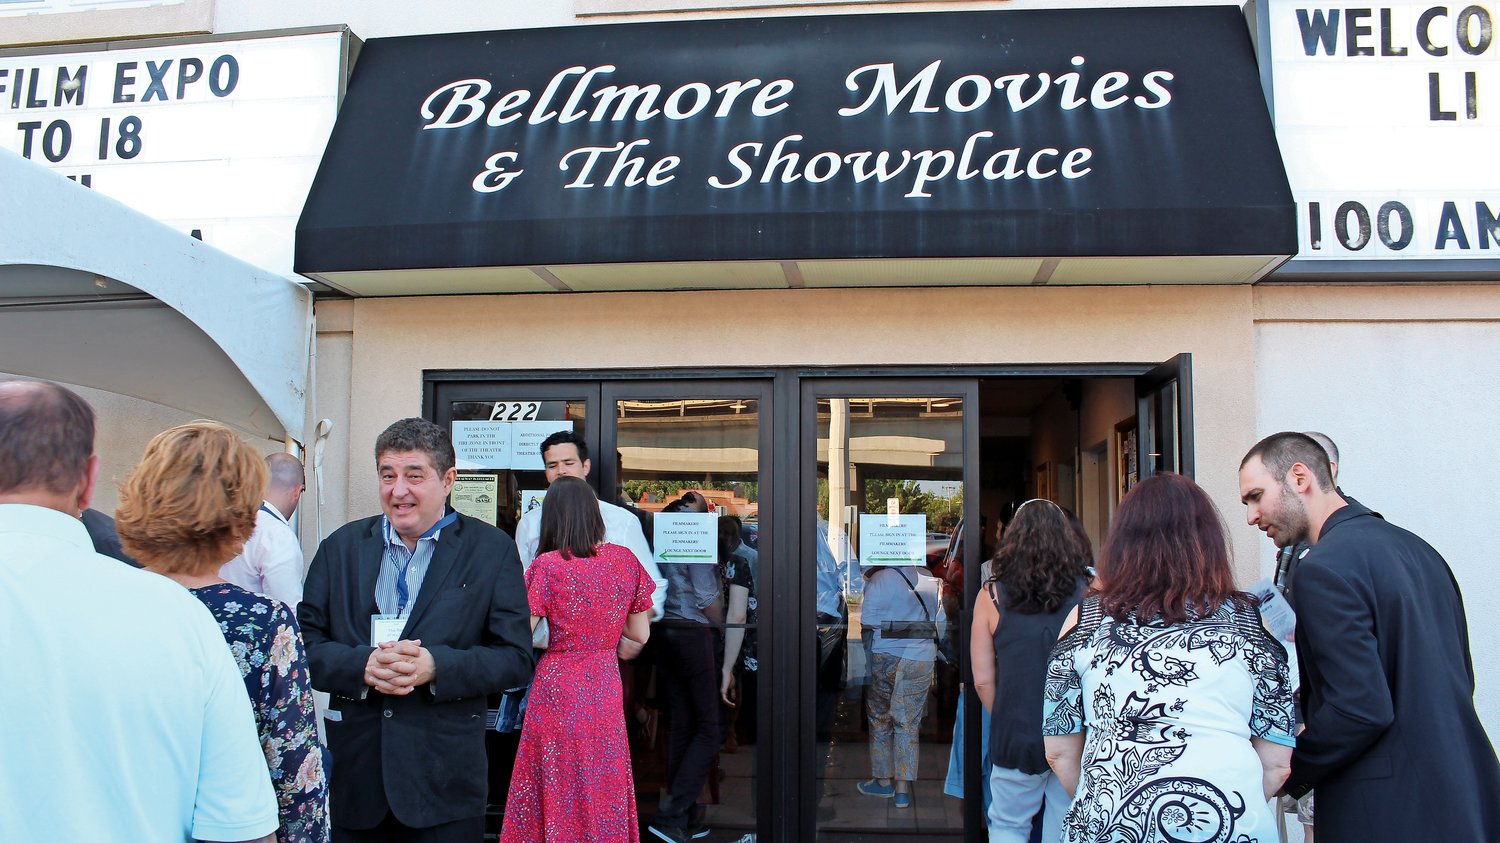 Filmmakers flock to Bellmore Movies each year for the Long Island International Film Expo, which was held at a different drive-in venue last year due to the pandemic.